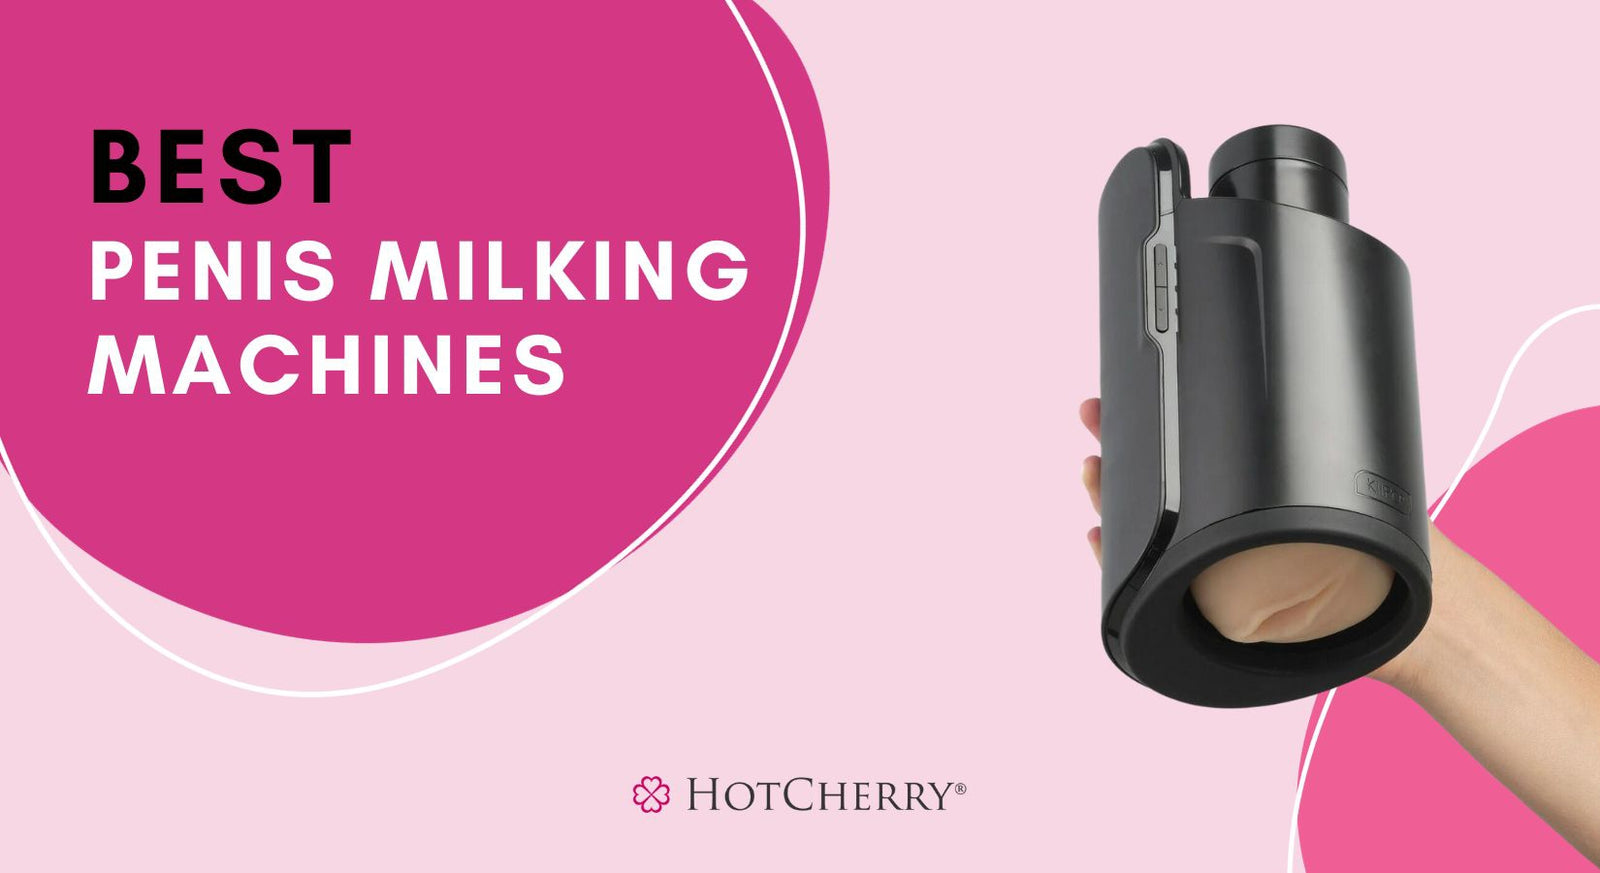 15 Best Penis Milking Machines that Will Suck You Dry